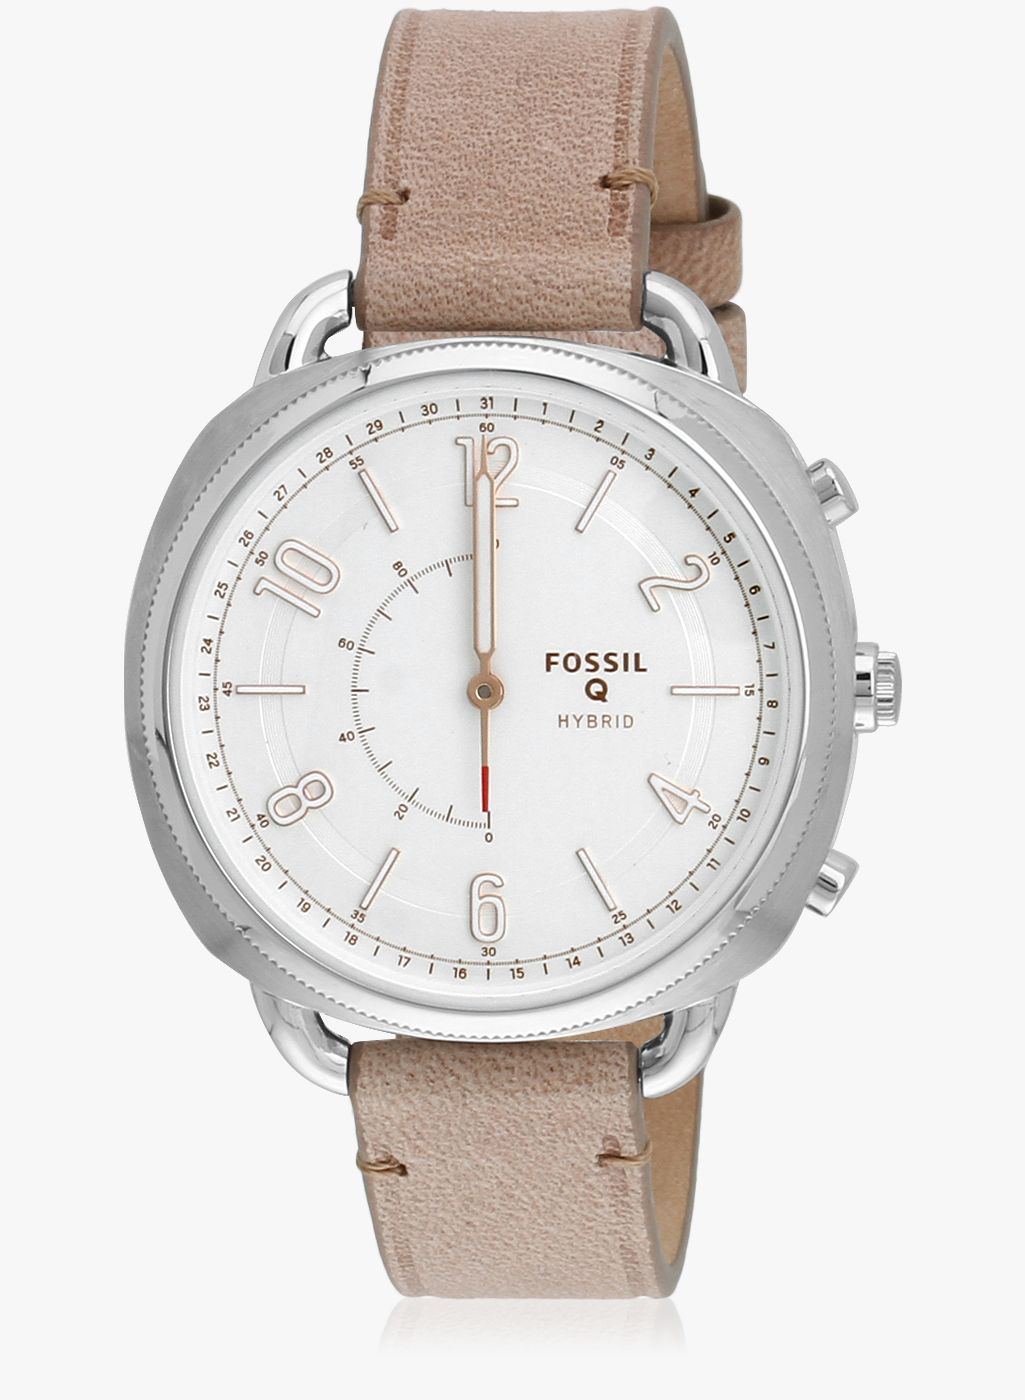 Fossil Store - Shop Fossil Watches, Handbags, Jewellery Online - Jabong